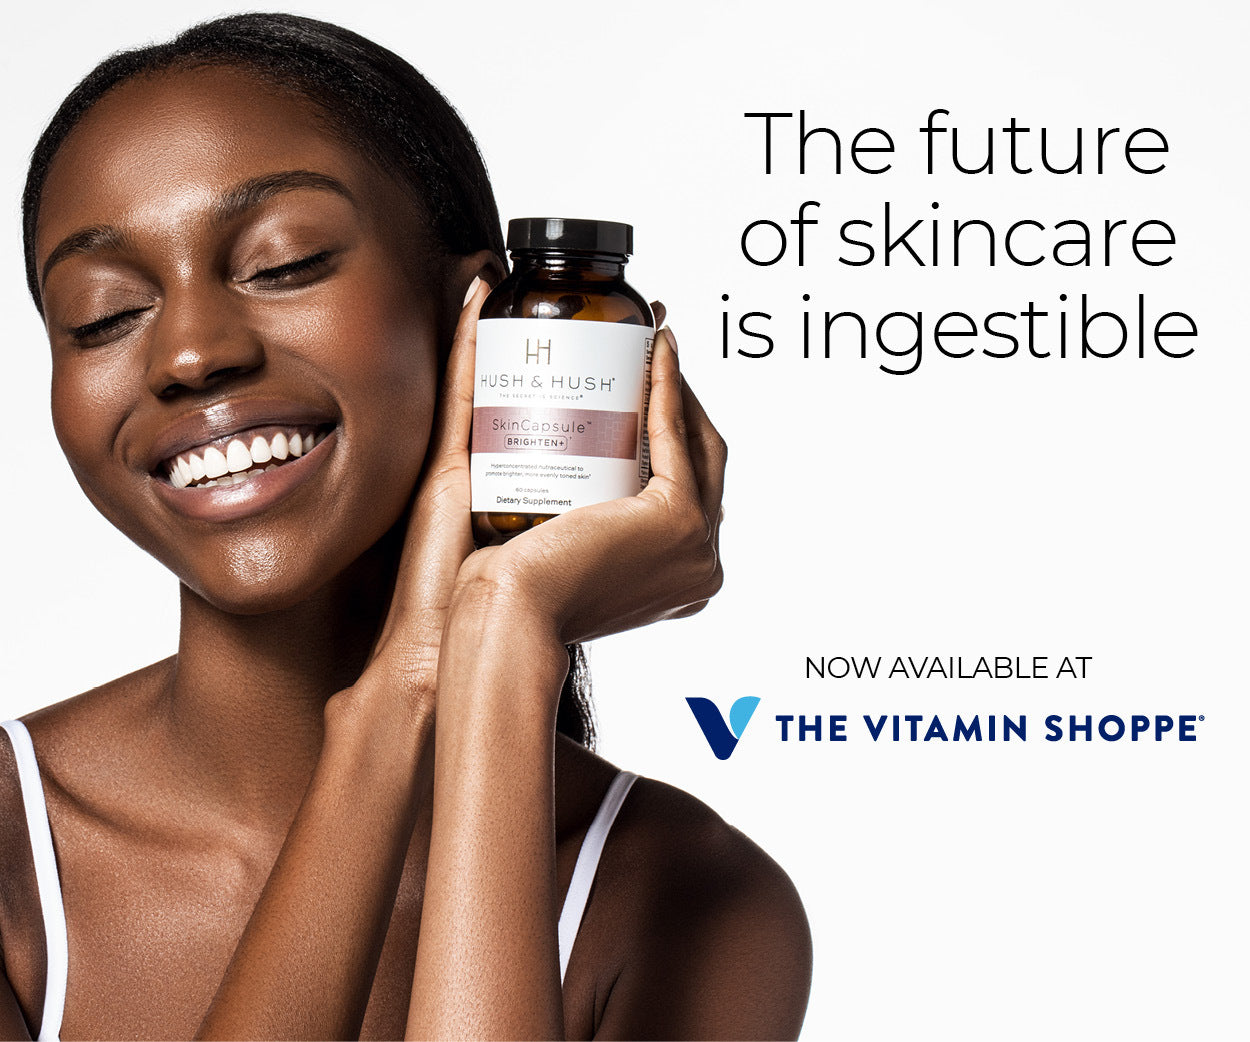 We're launching in 450 Vitamin Shoppe locations!